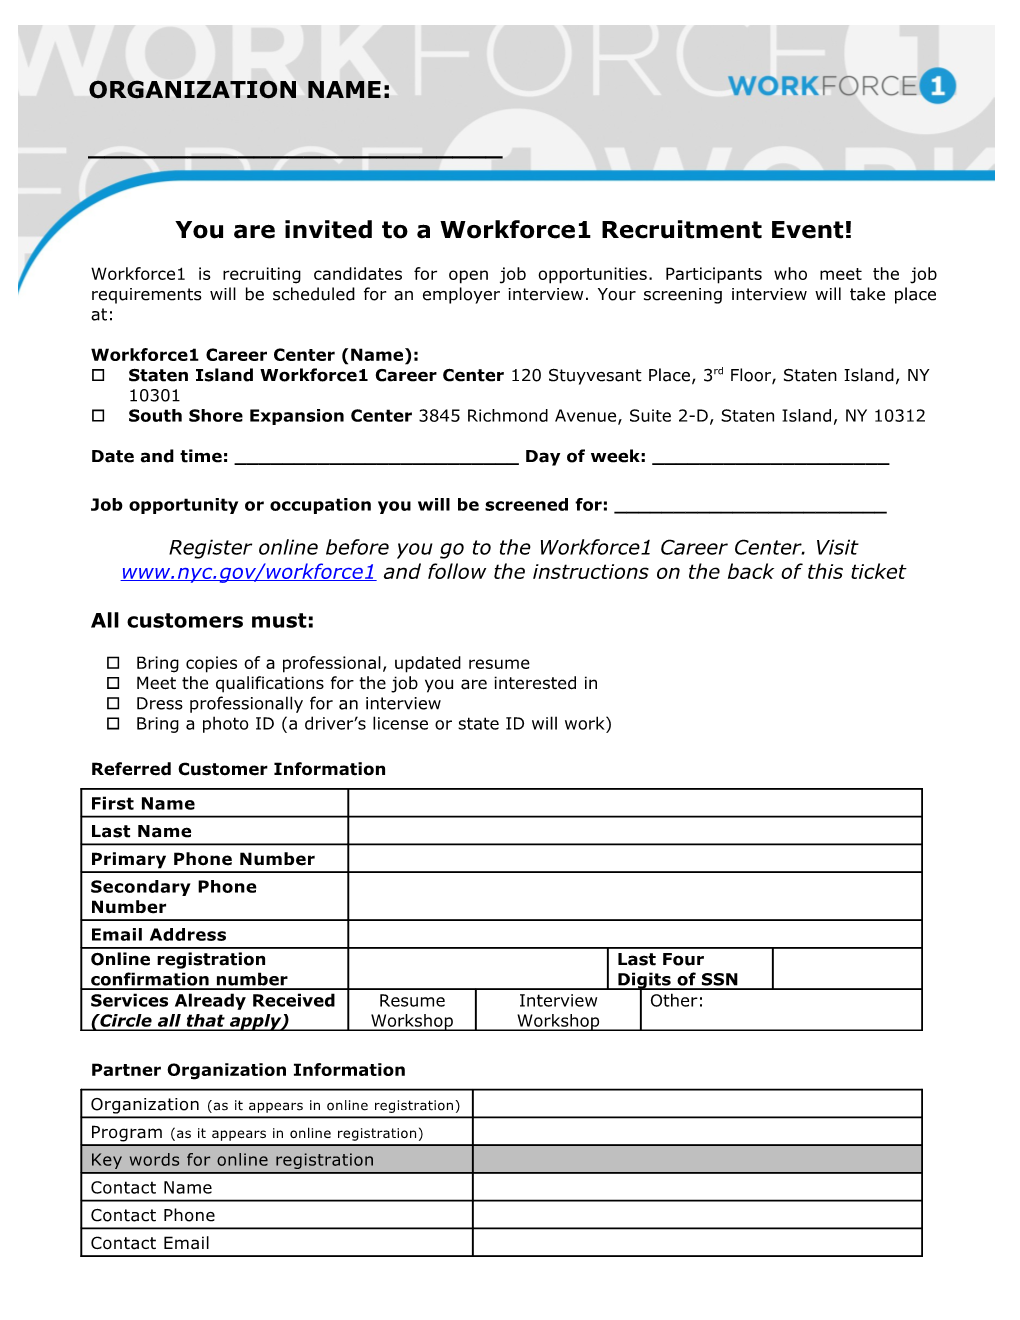 You Are Invited to a Workforce1 Recruitment Event!